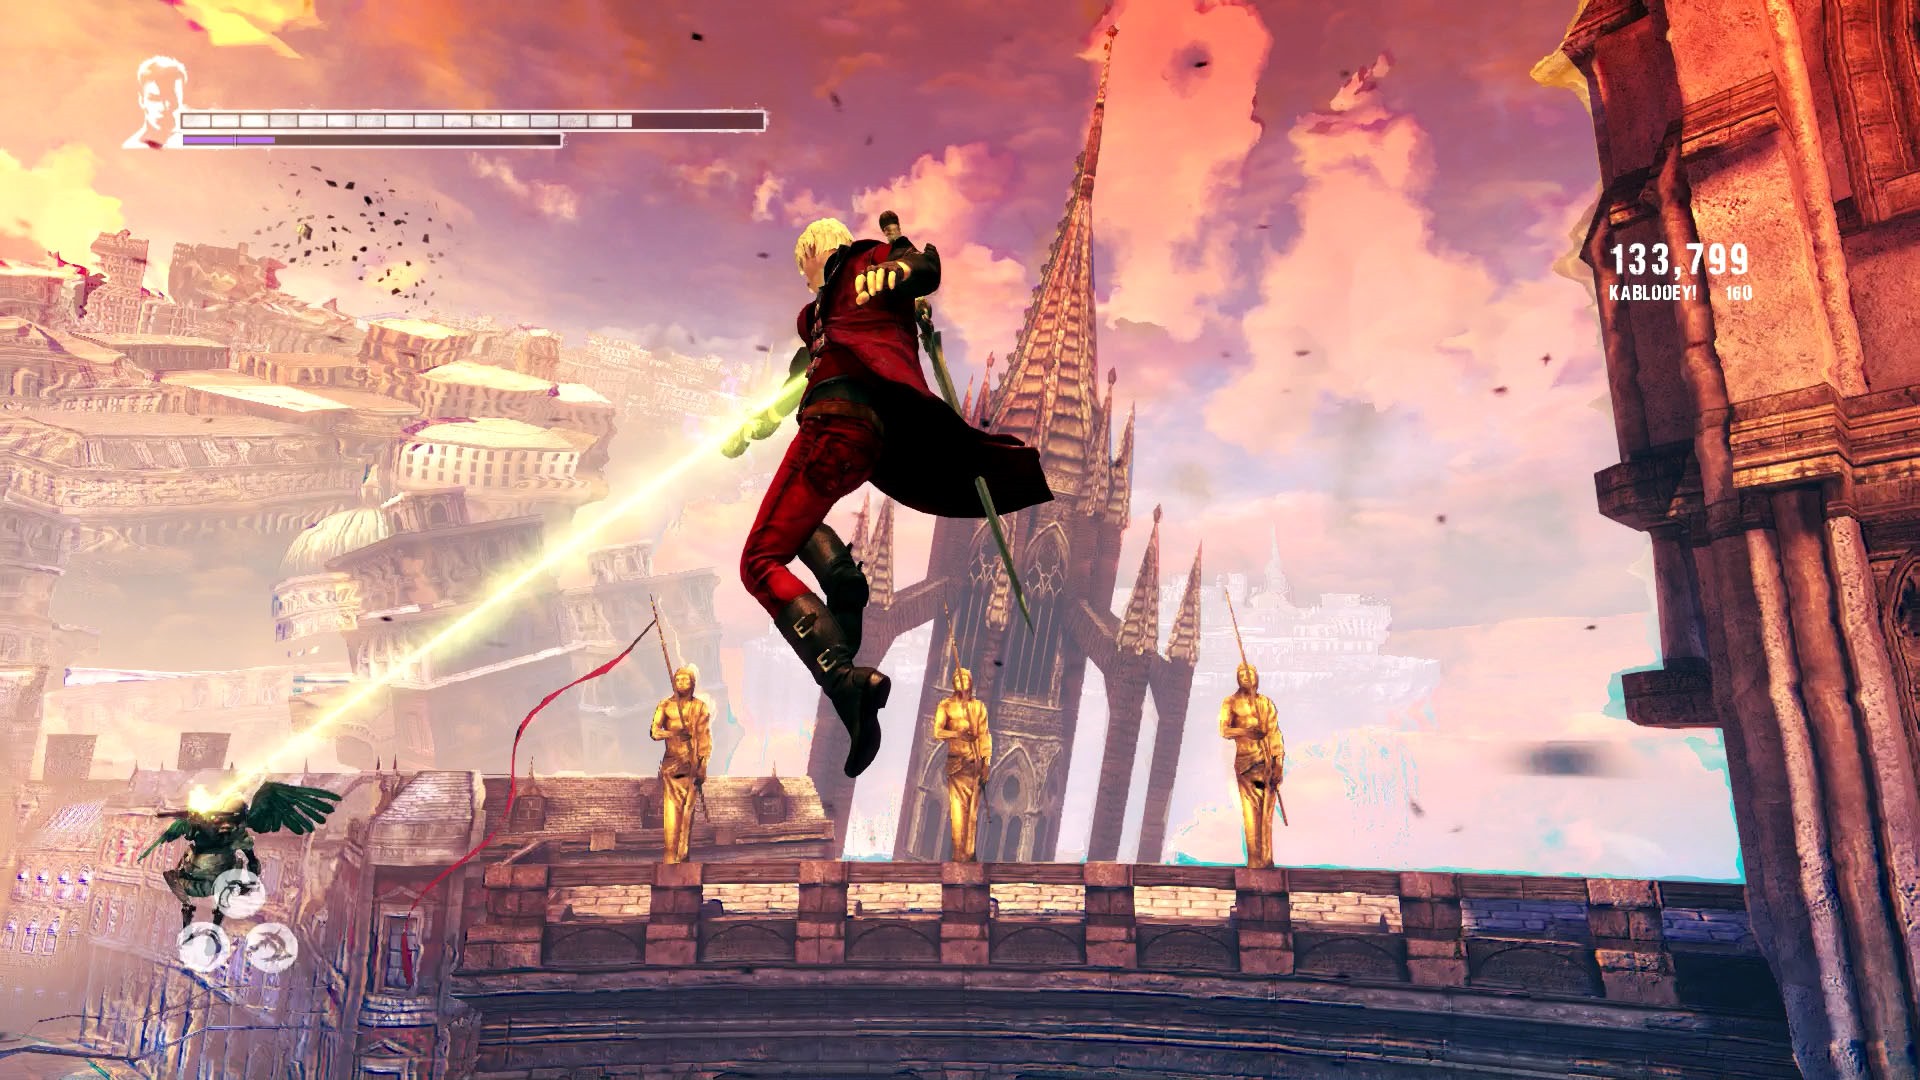 Take A Gander At These DmC Devil May Cry: Definitive Edition Screenshots -  Siliconera